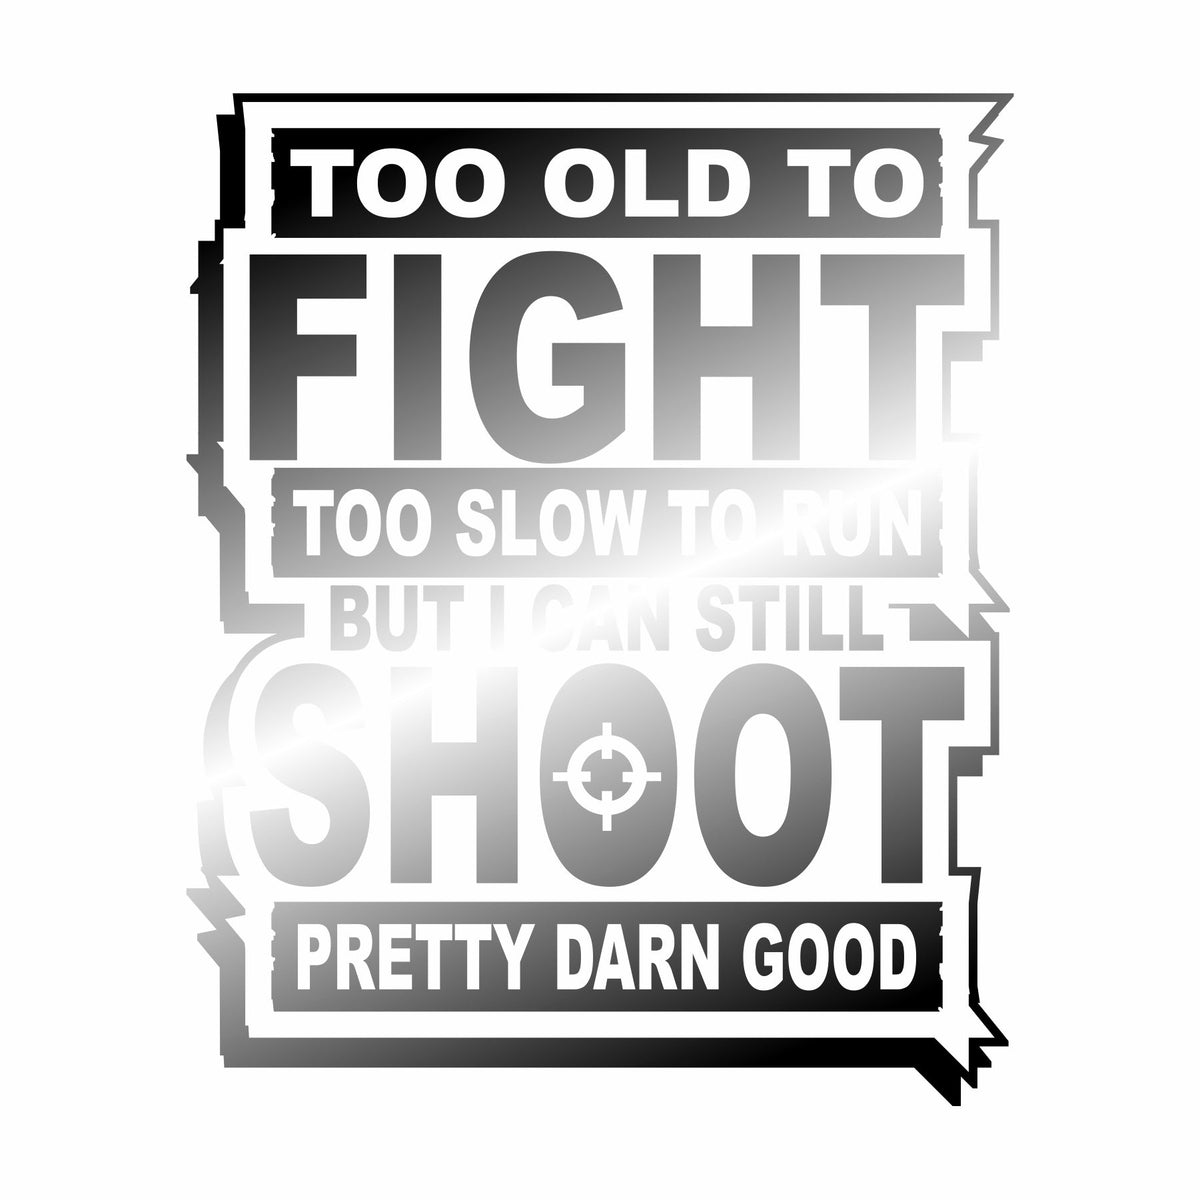 Too Old to Fight - Vinyl Decal - Free Shipping